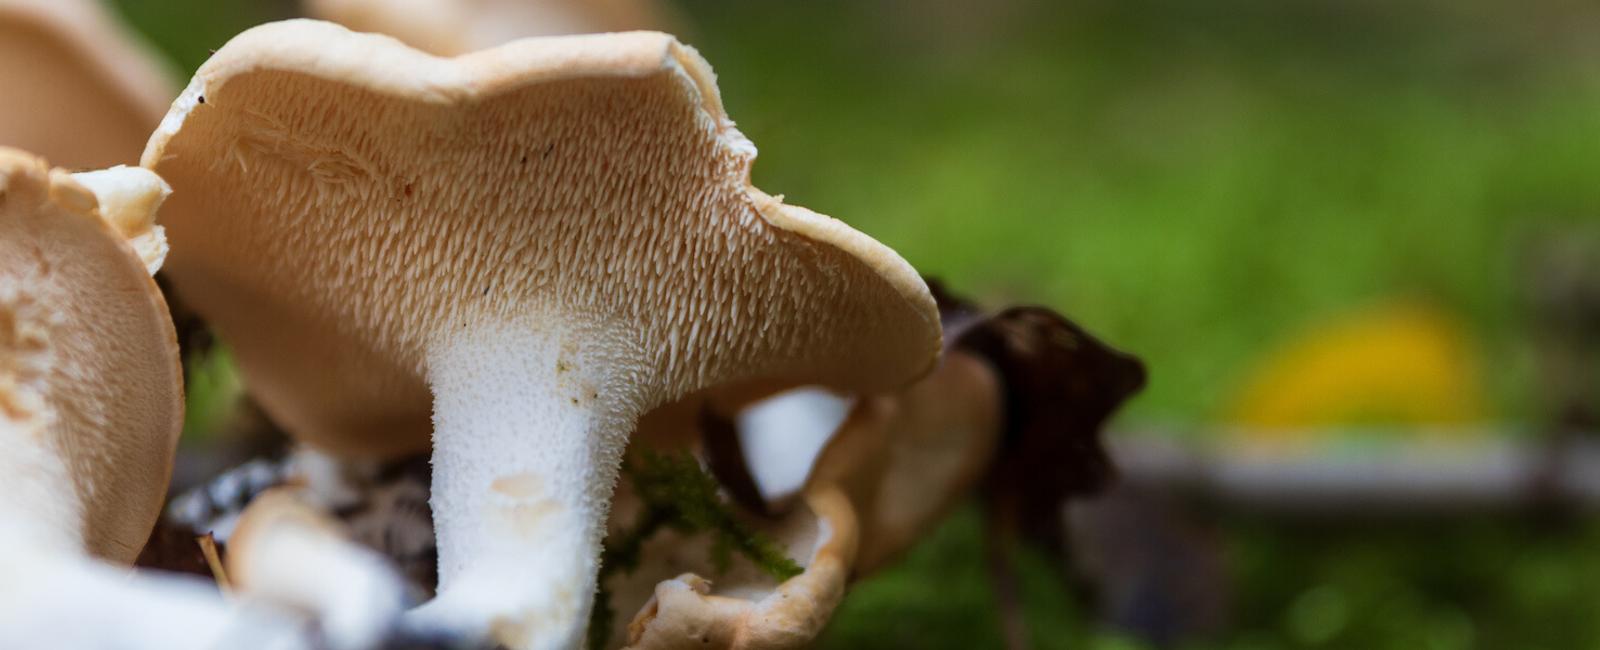 The Complete Guide to the Hedgehog Mushroom